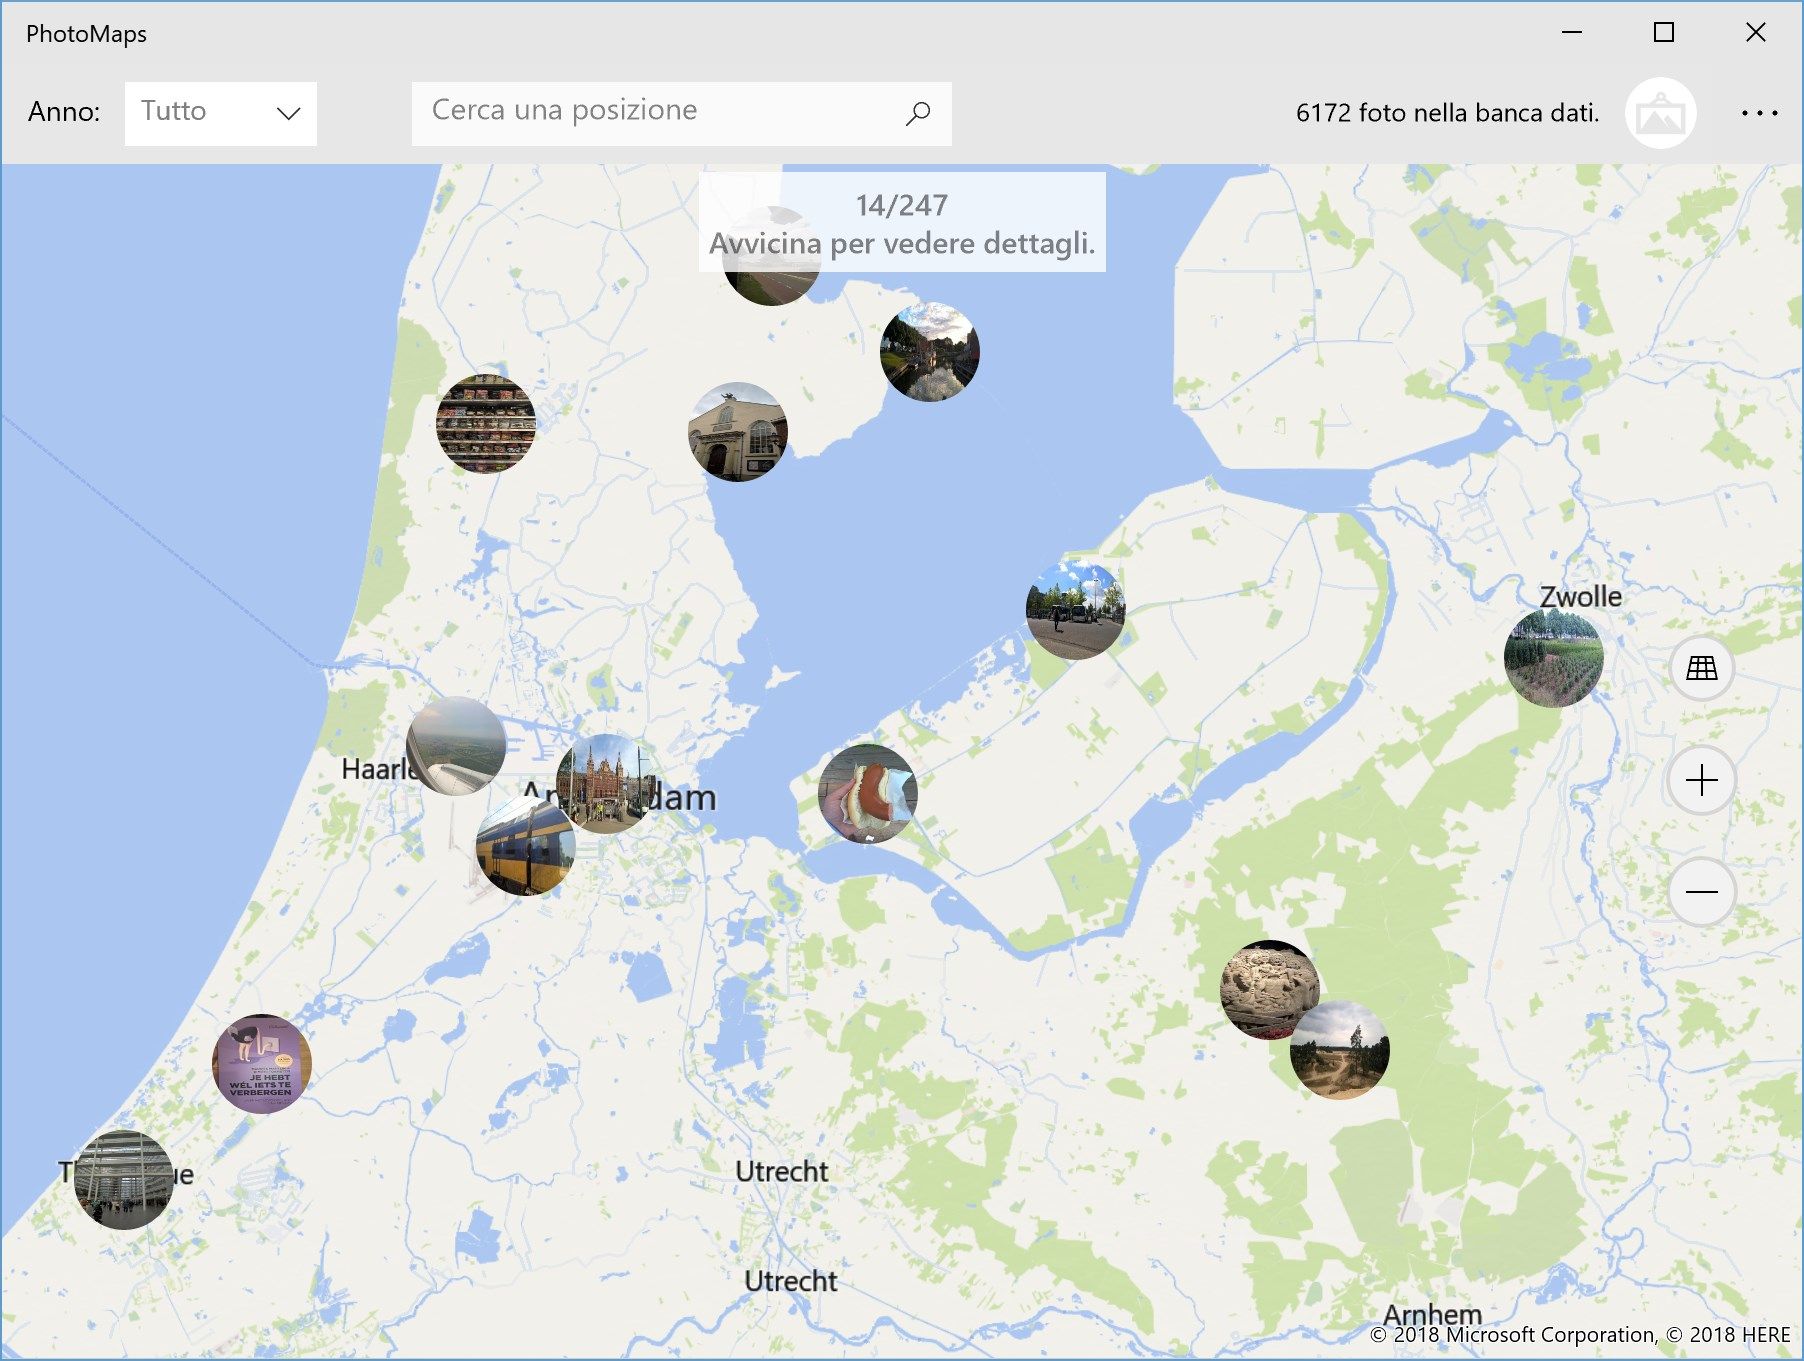 See all your photos on a map, exactly where you took them.